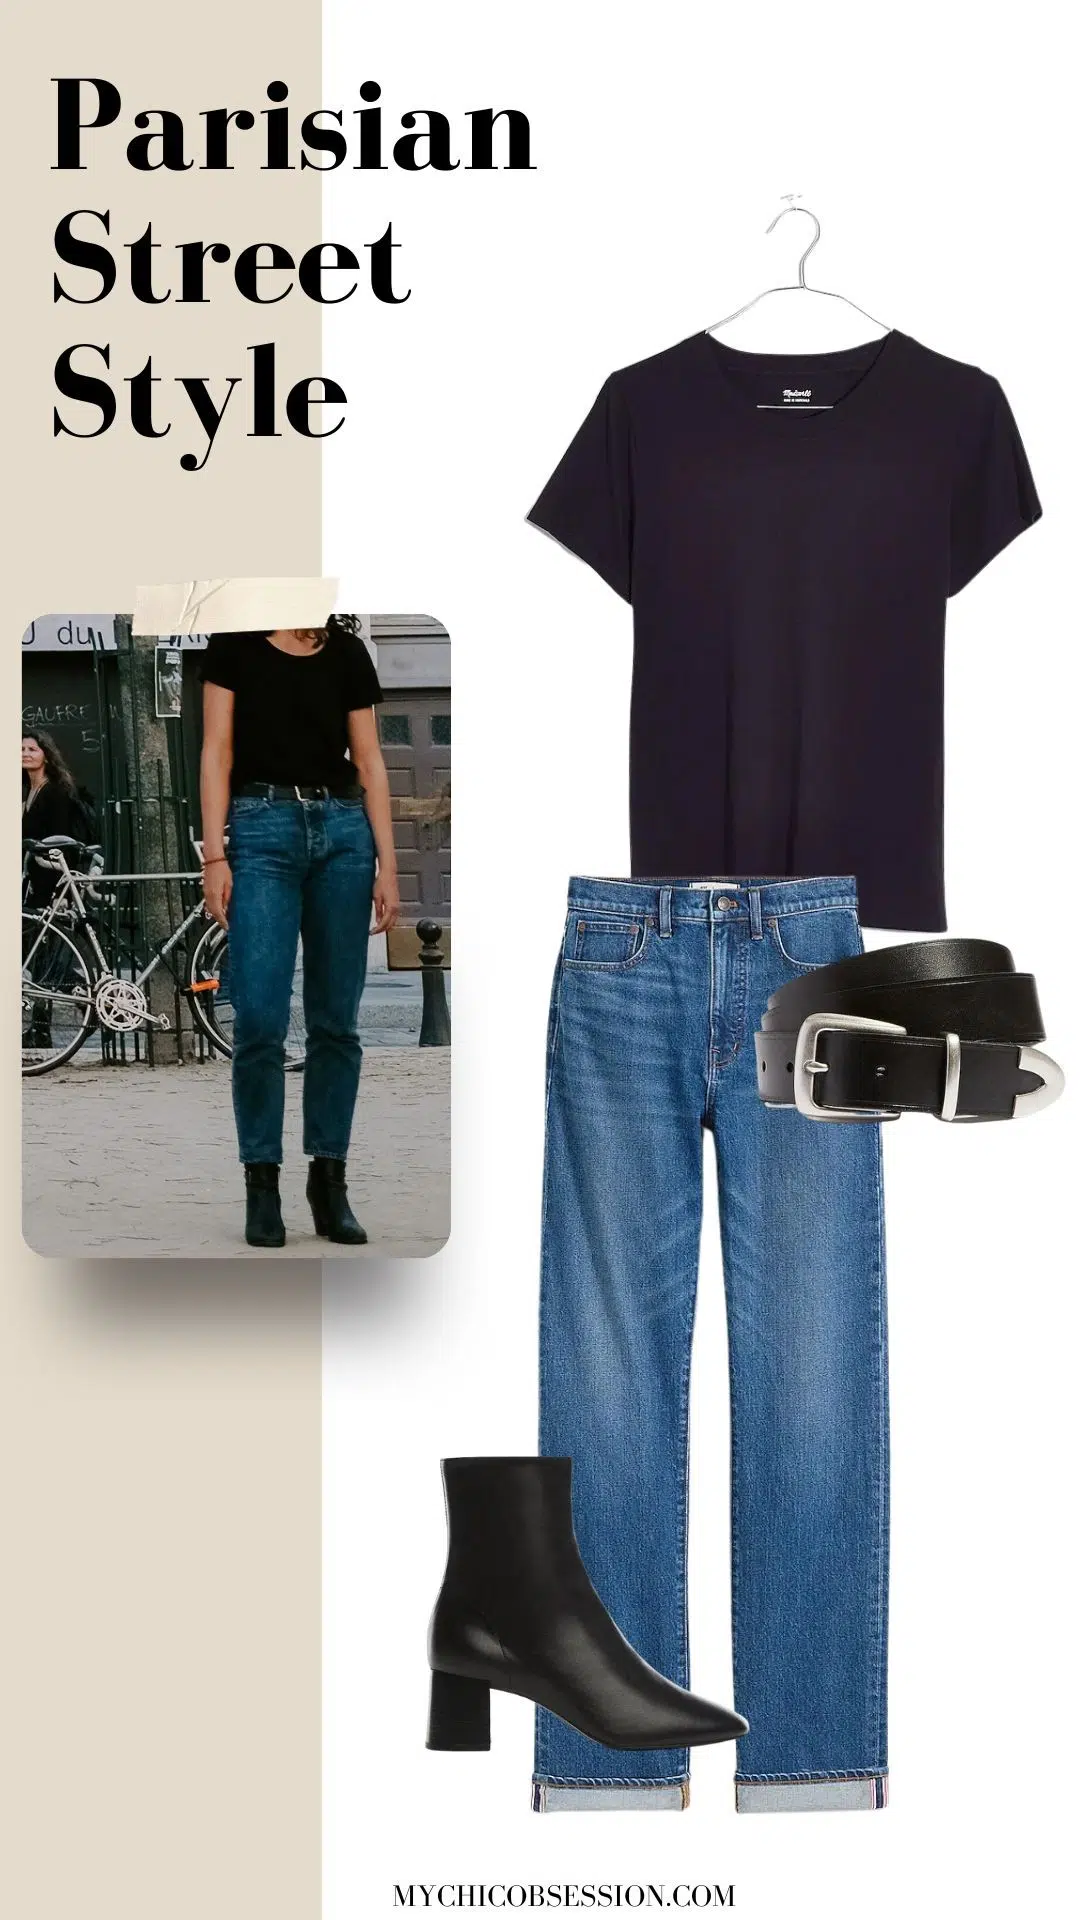 t-shirt + slim jeans + ankle boots